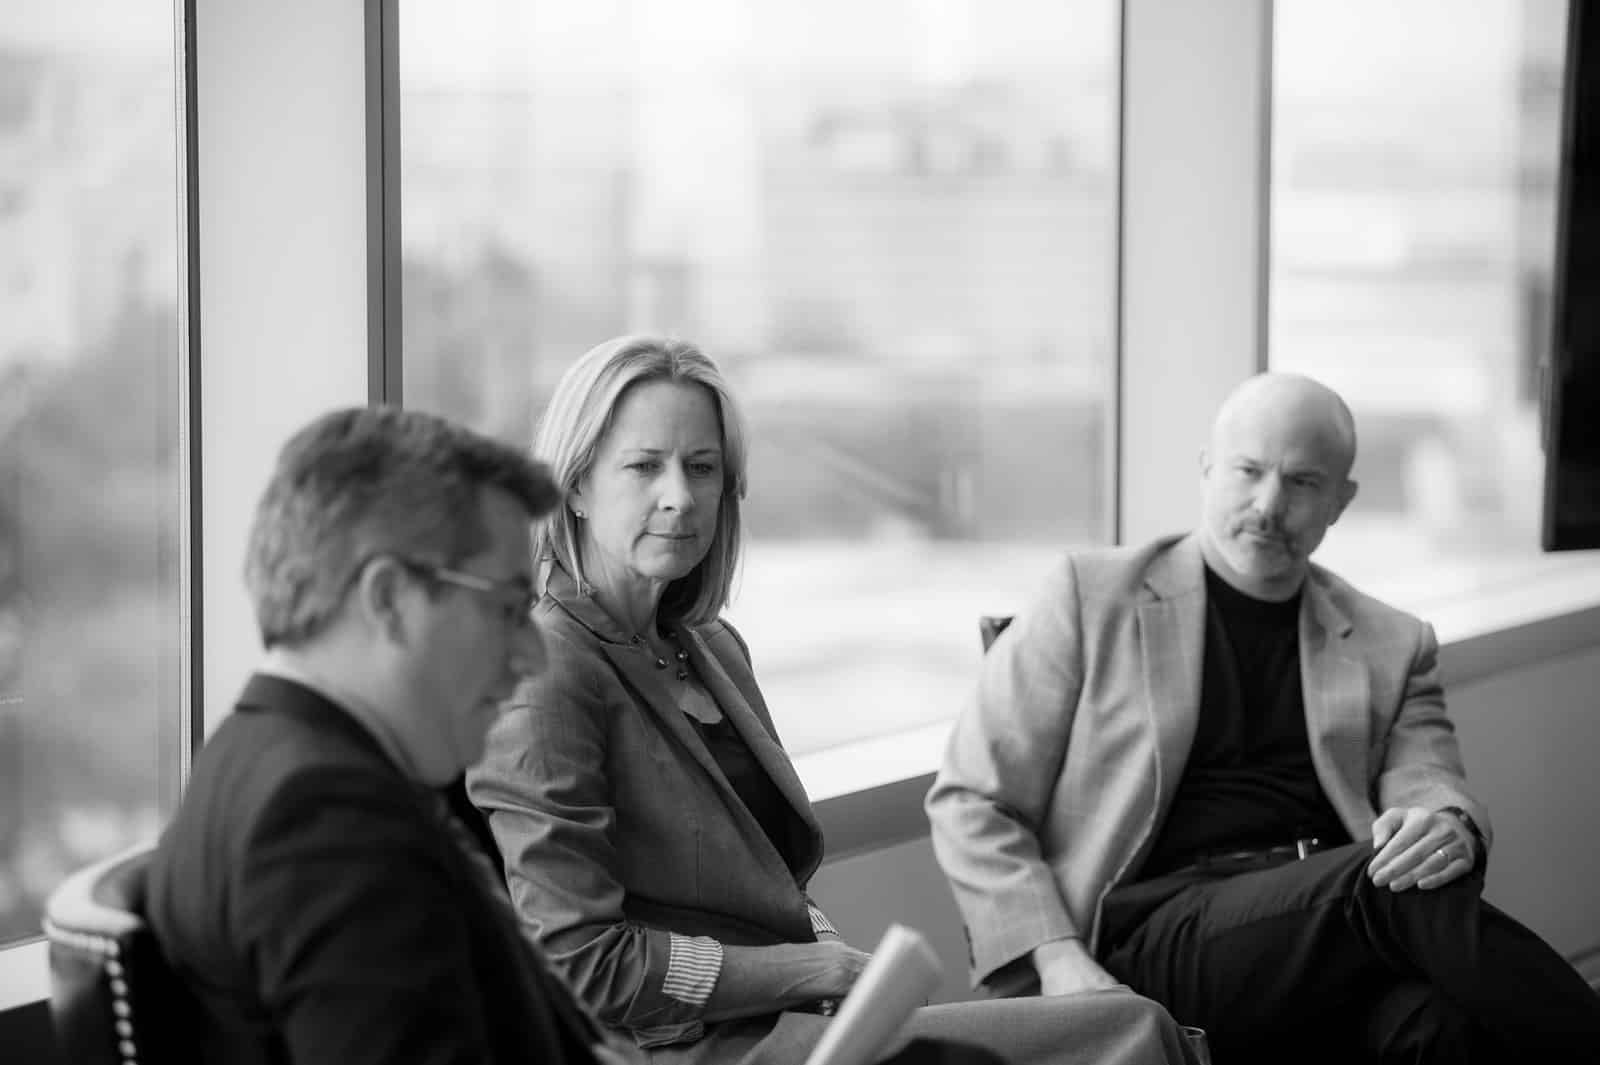 Black and white photo of three people in a formal setting. The person on the left, holding a paper, appears to be speaking, while the two others are seated and listening attentively. They are in a modern office with large windows in the background.